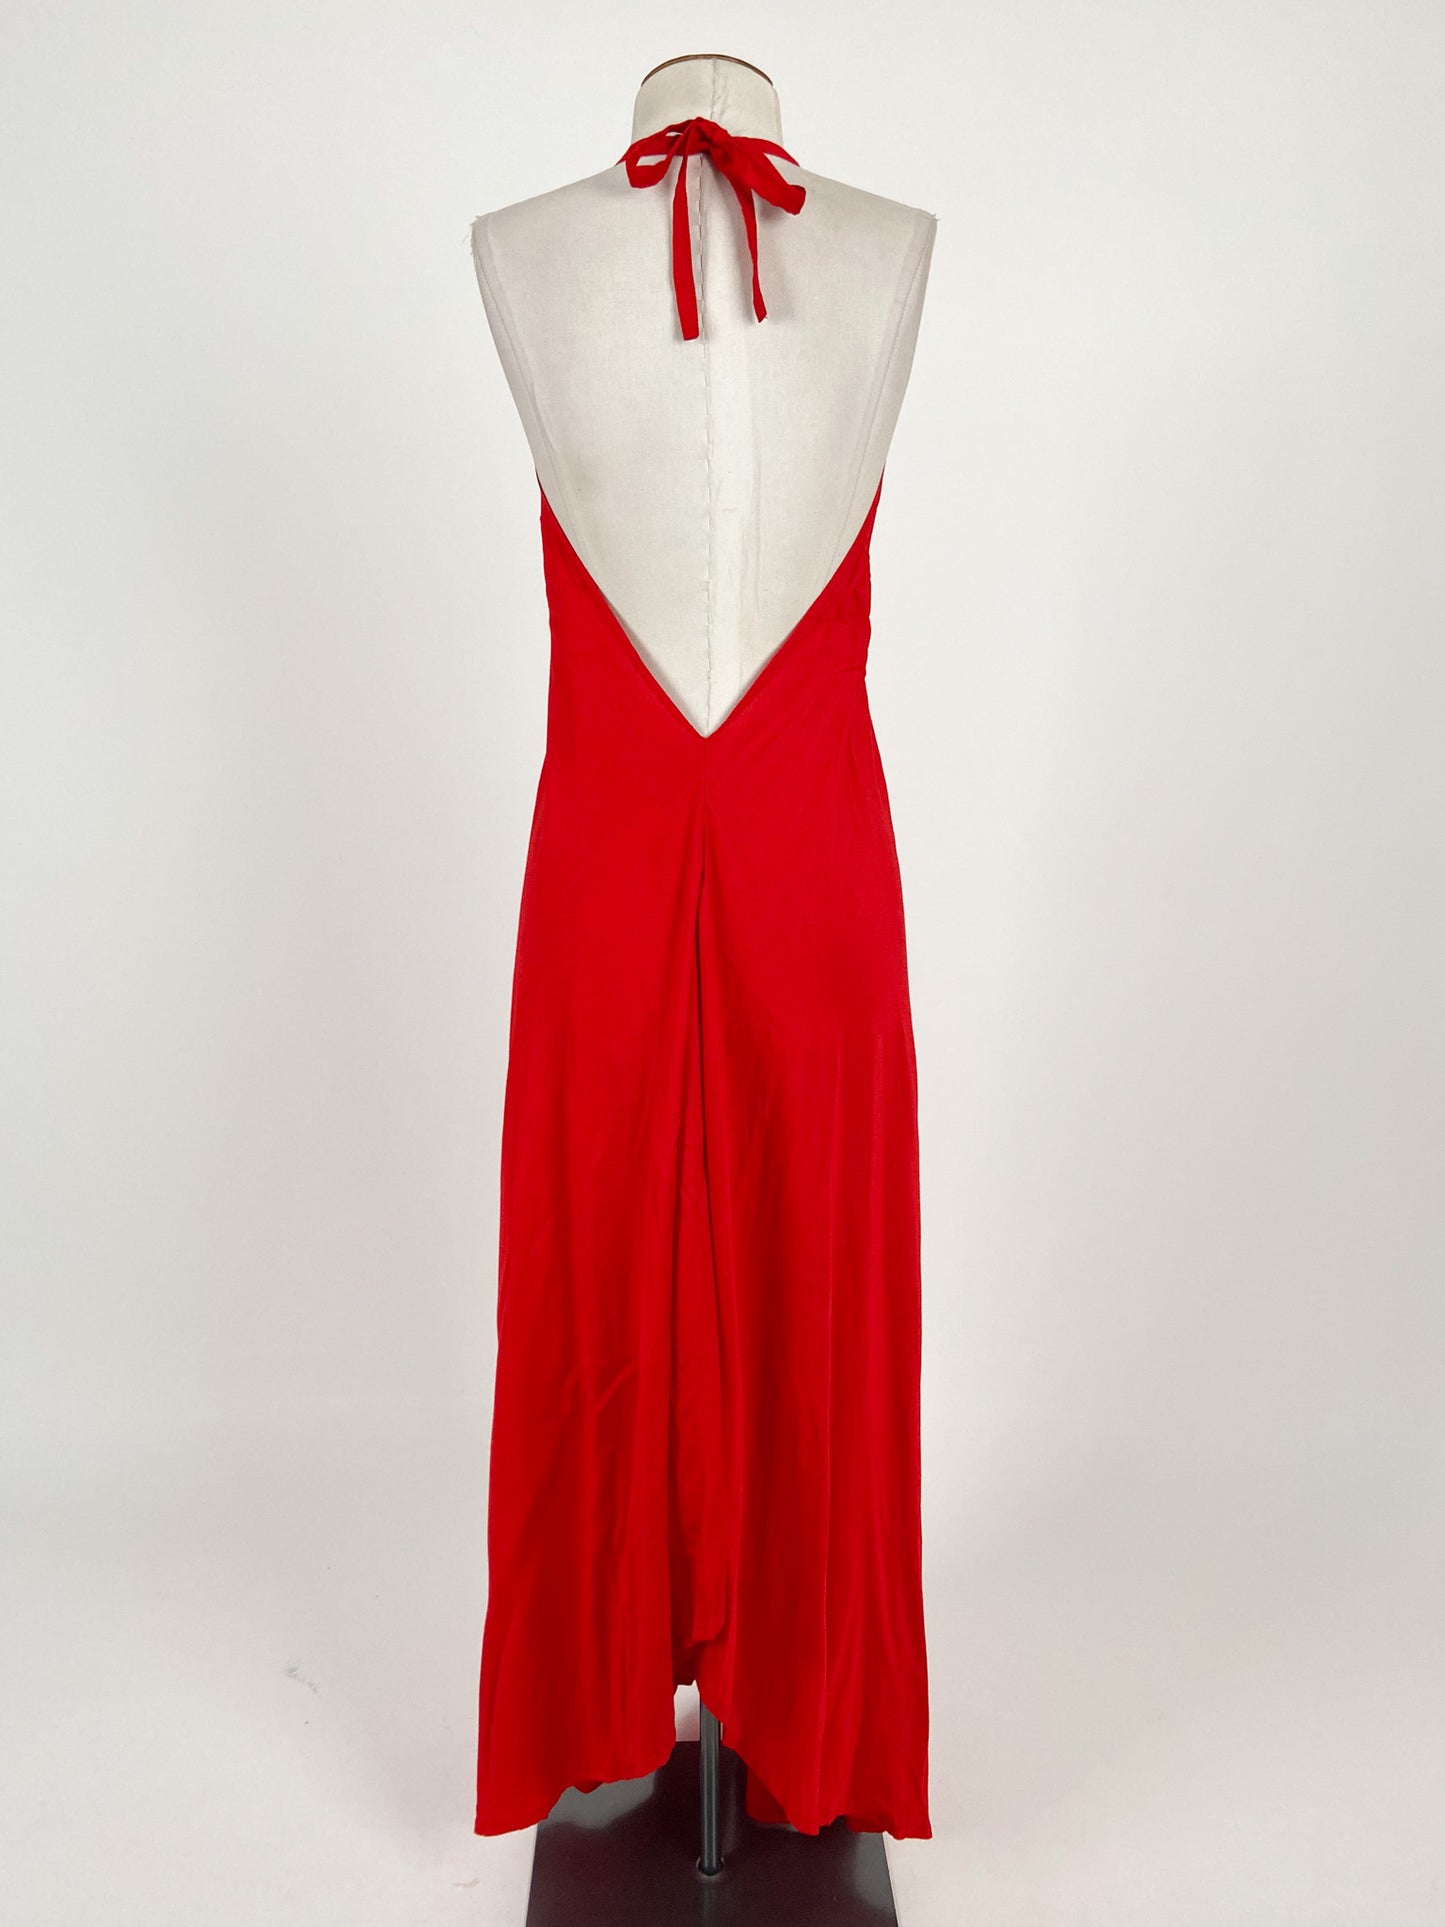 Unknown Brand | Red Cocktail/Formal Dress | Size S